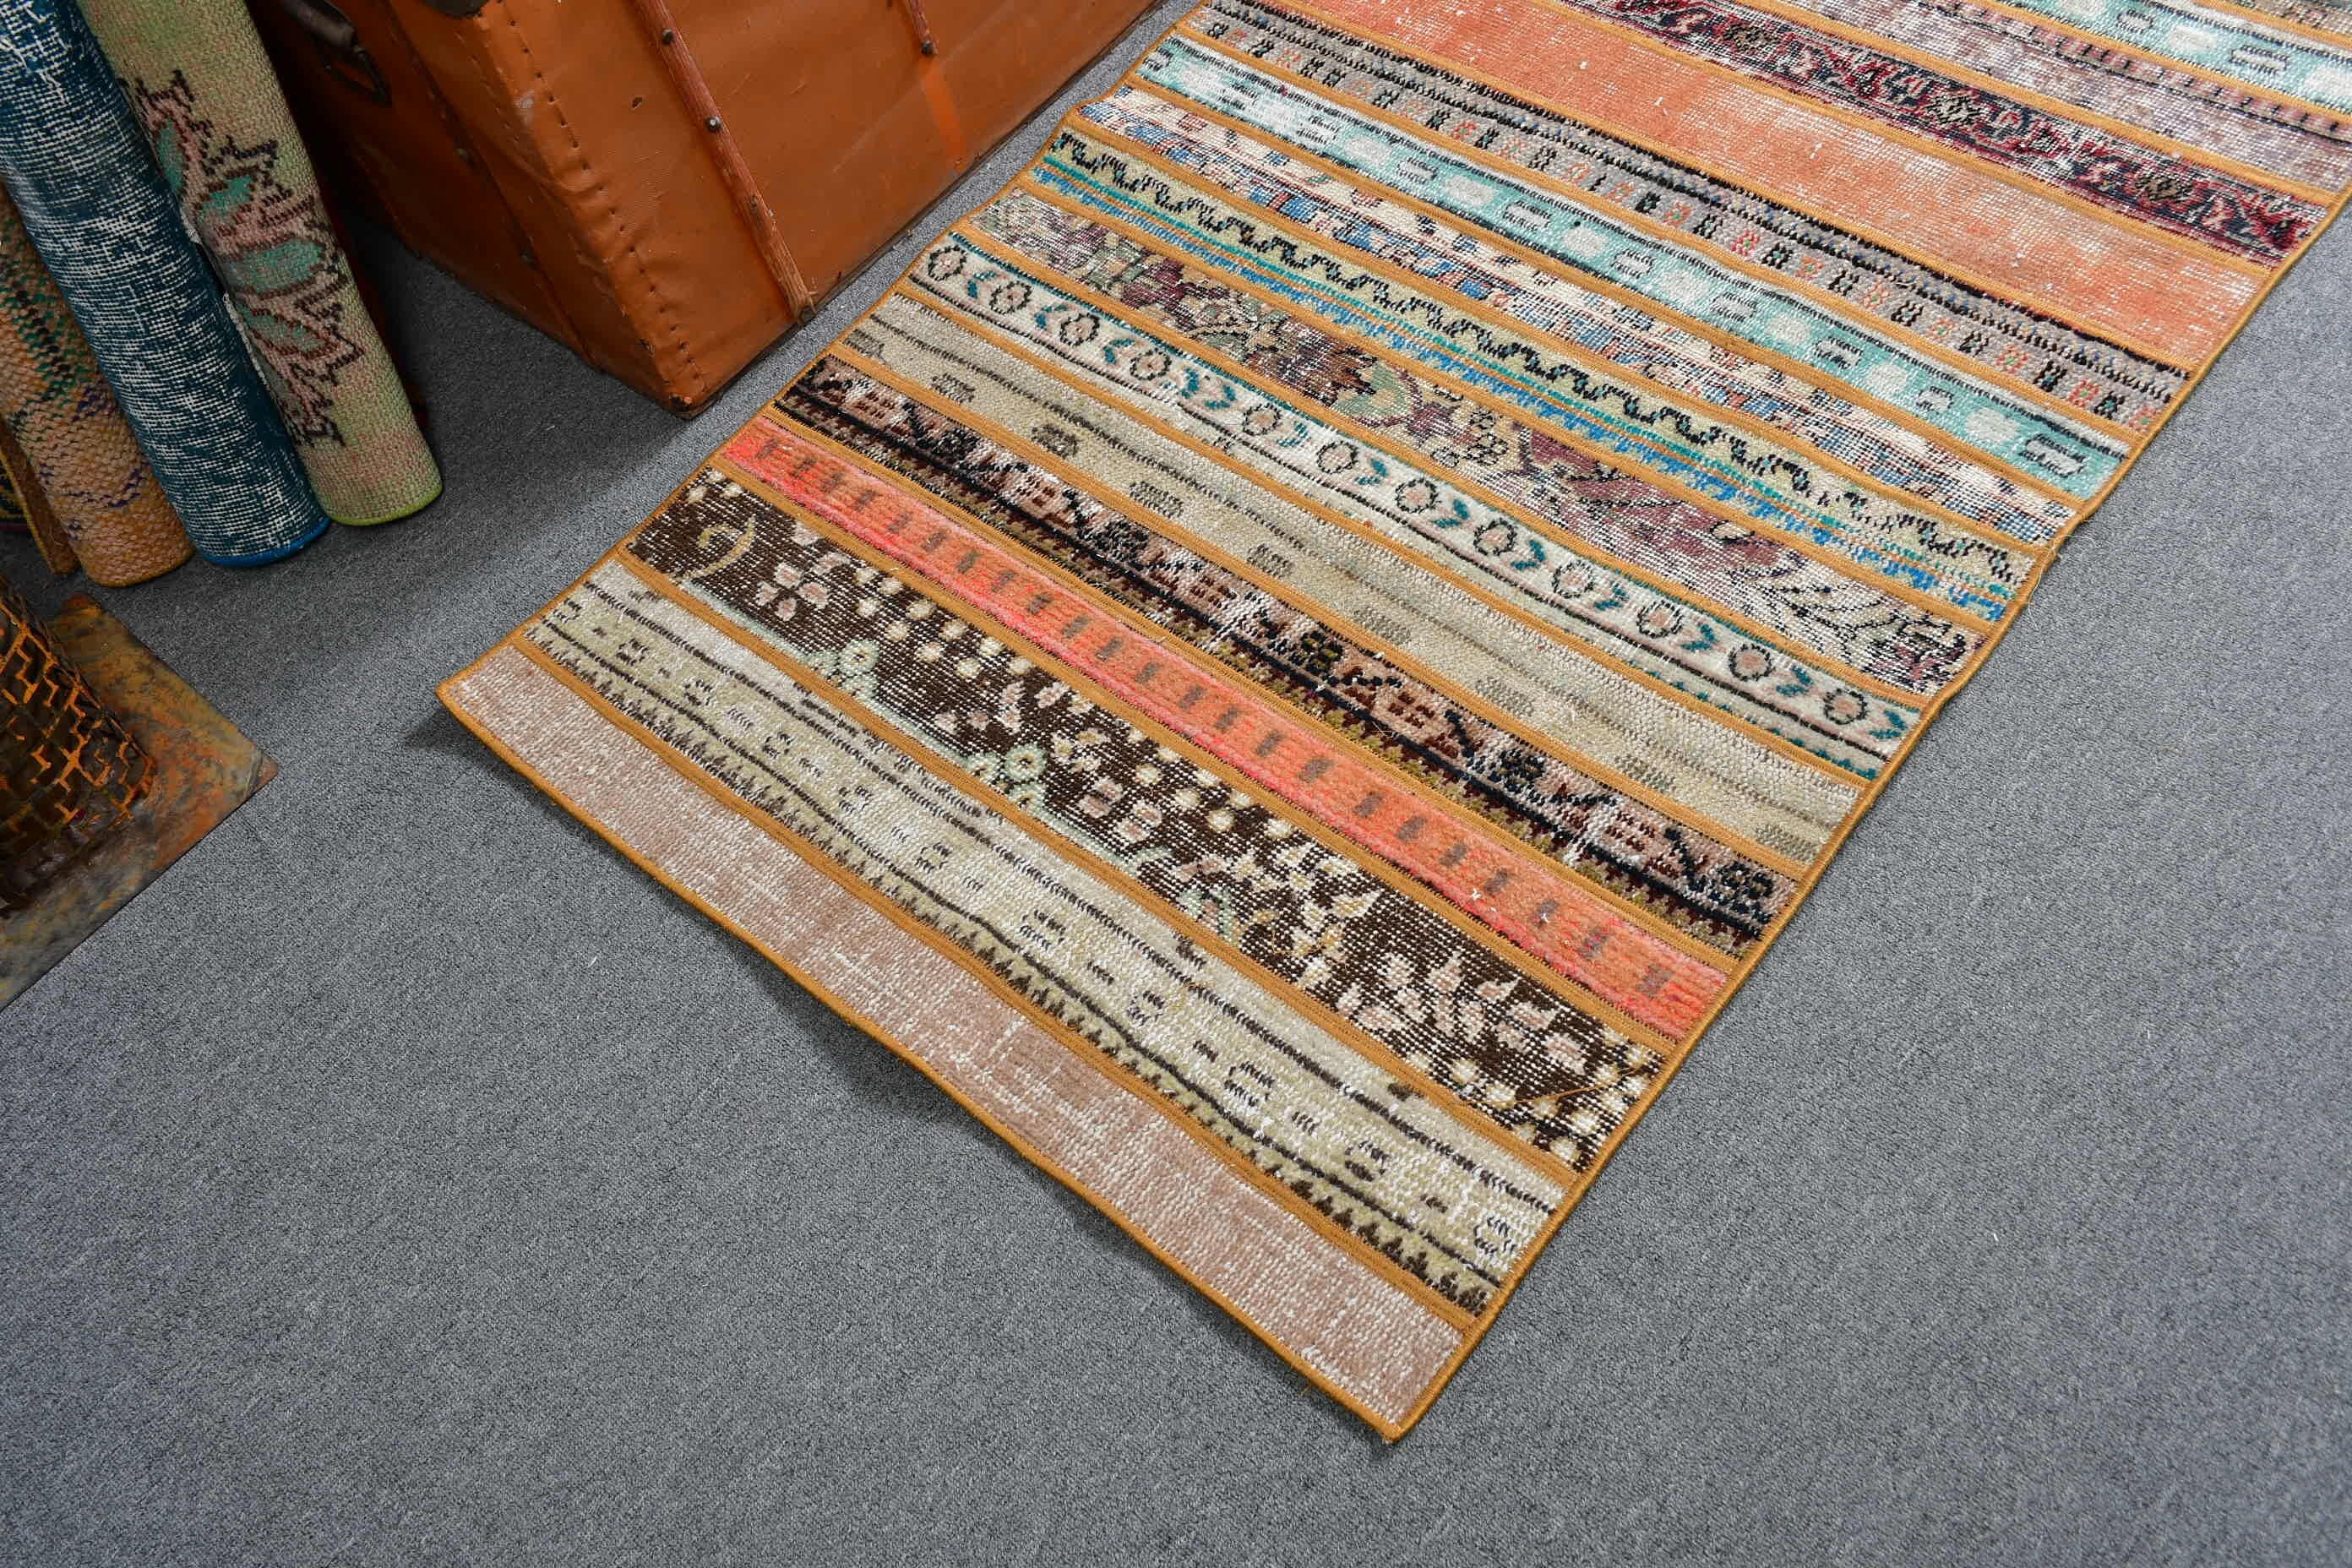 Rugs for Entry, Oushak Rug, Kitchen Rugs, Vintage Decor Rug, Moroccan Rugs, Vintage Rug, Turkish Rugs, Bedroom Rug, 3x5.1 ft Accent Rug